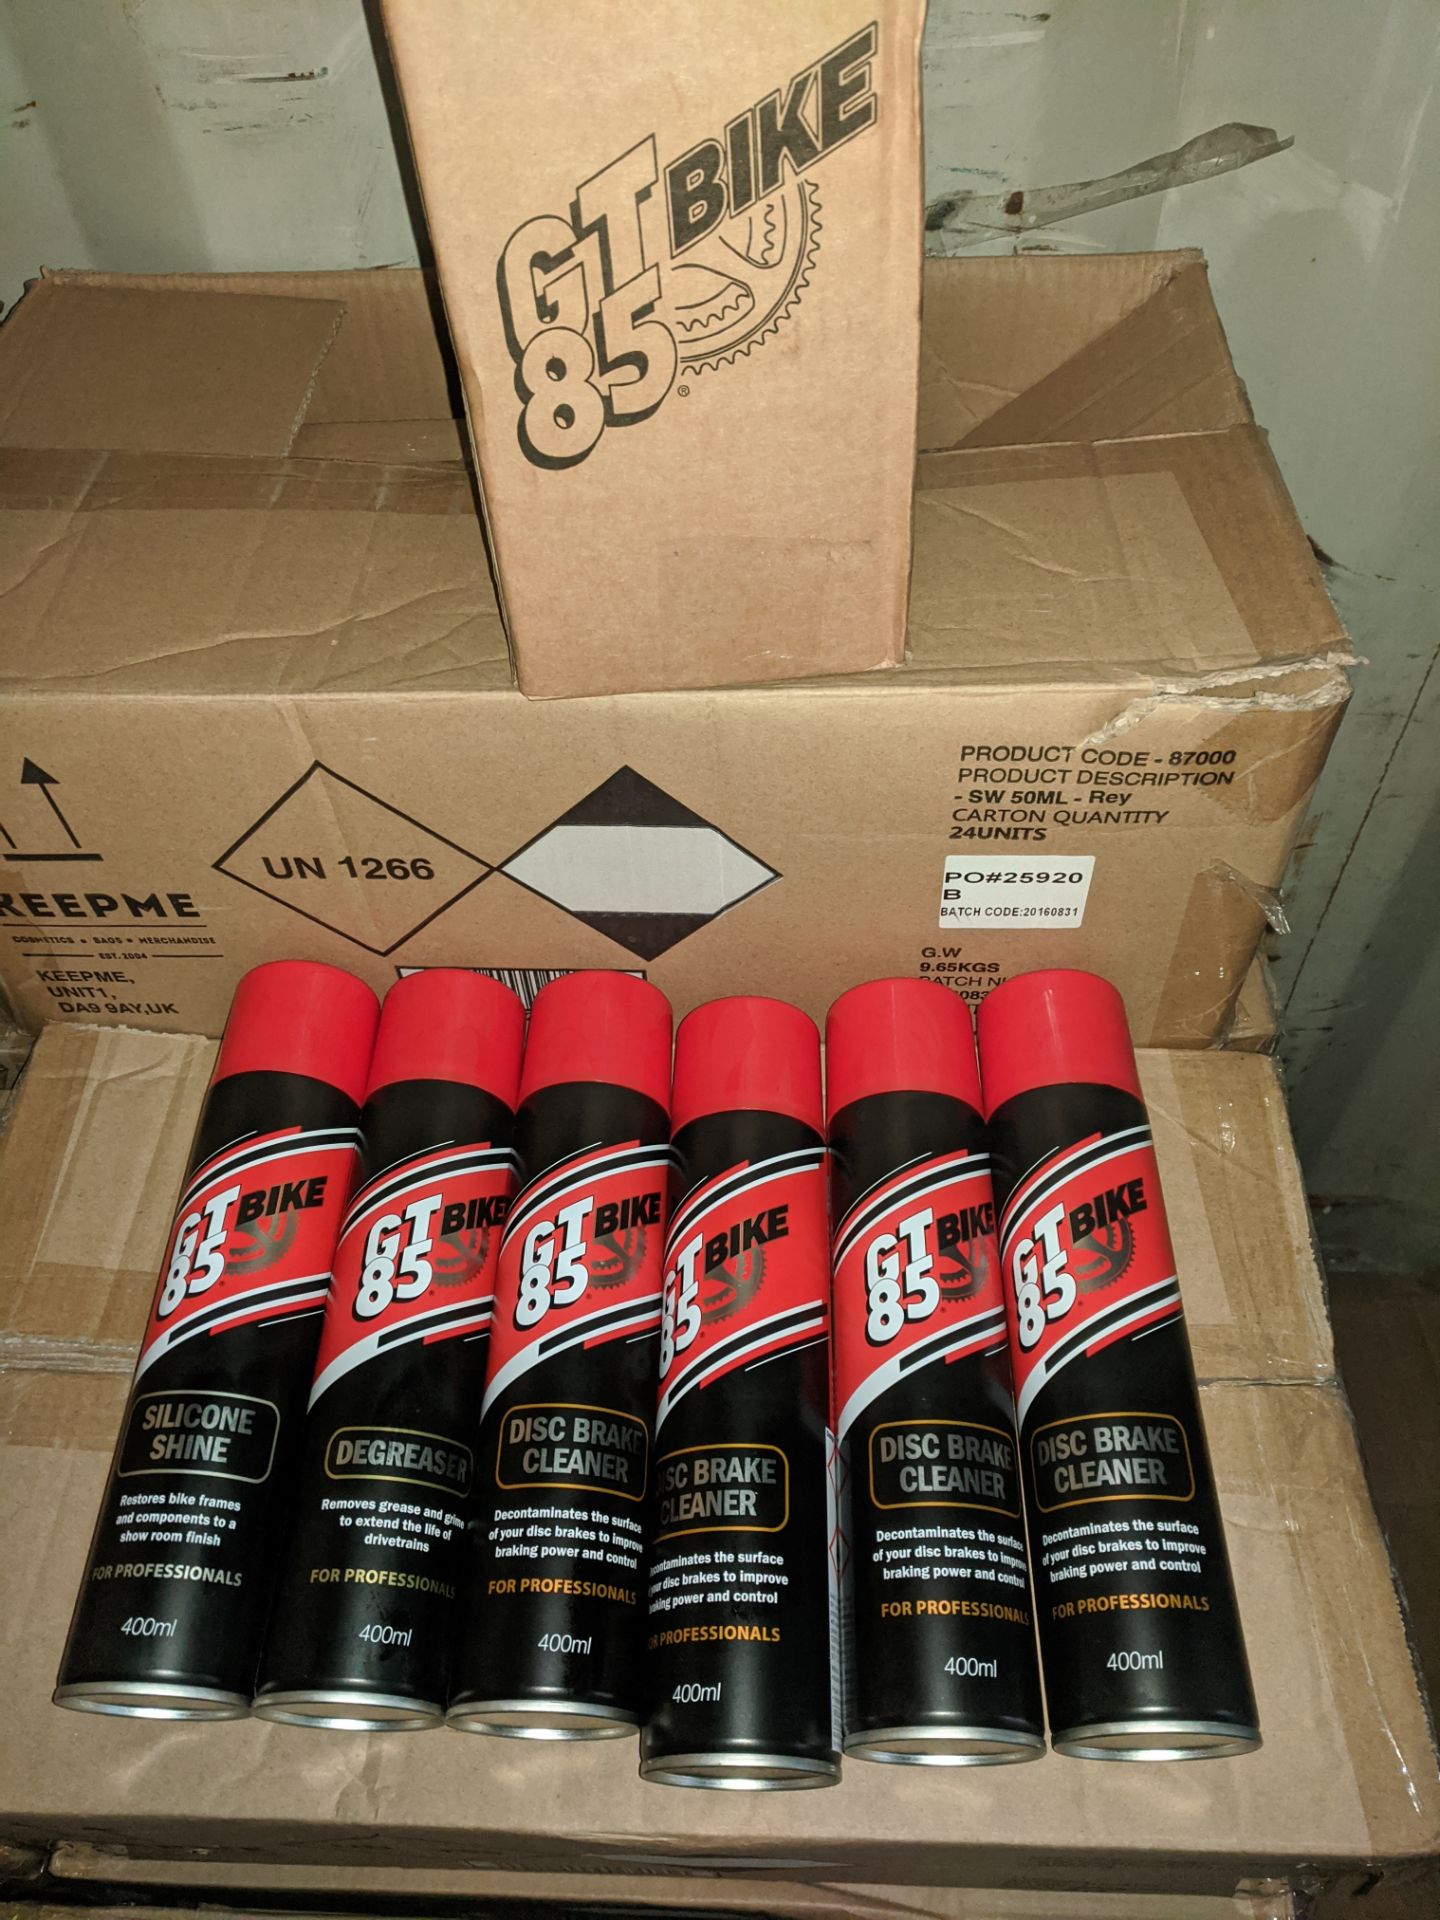 3pcs cans of brand new GT 85 - 400ml size 3pcs , cans of Brand new GT 85 - 400ml size new and sealed